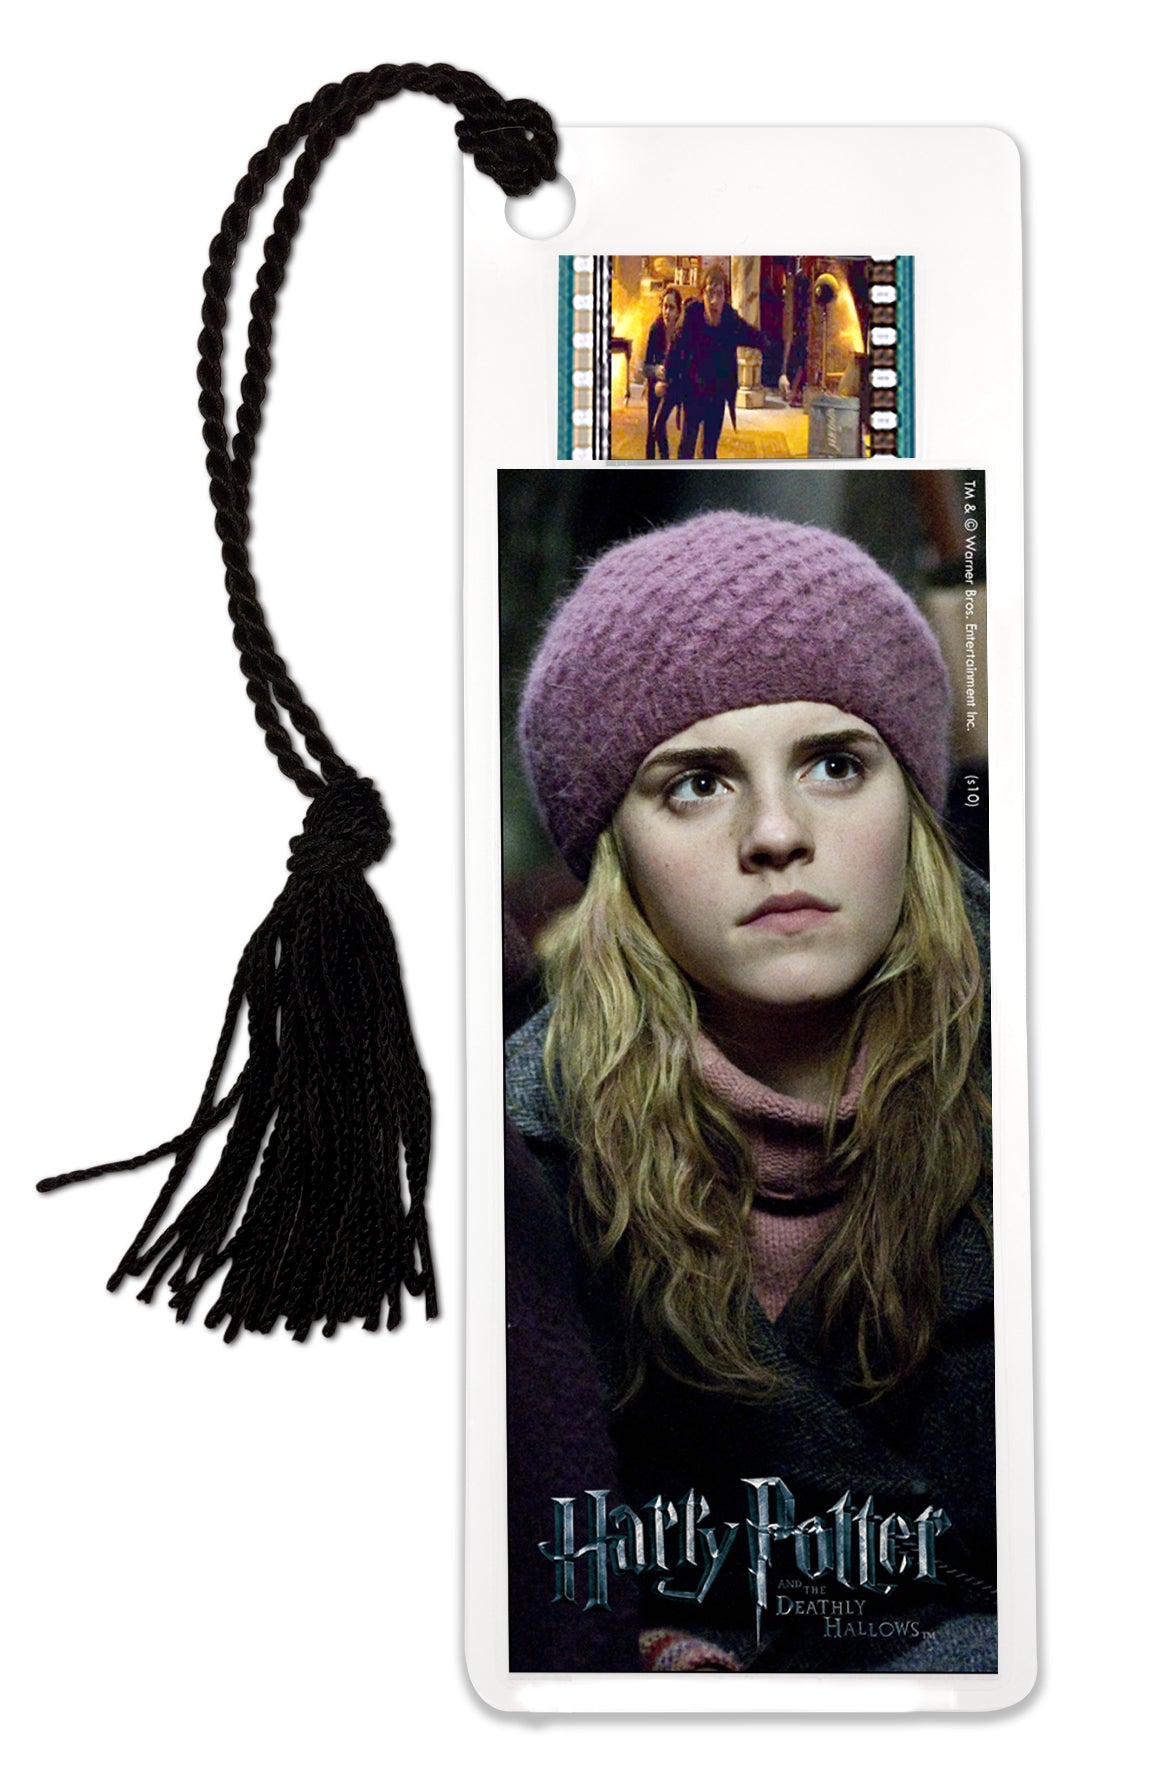 Harry Potter and the Deathly Hallows: Part 1 (Hermione Granger) FilmCells™ Bookmark USBM563